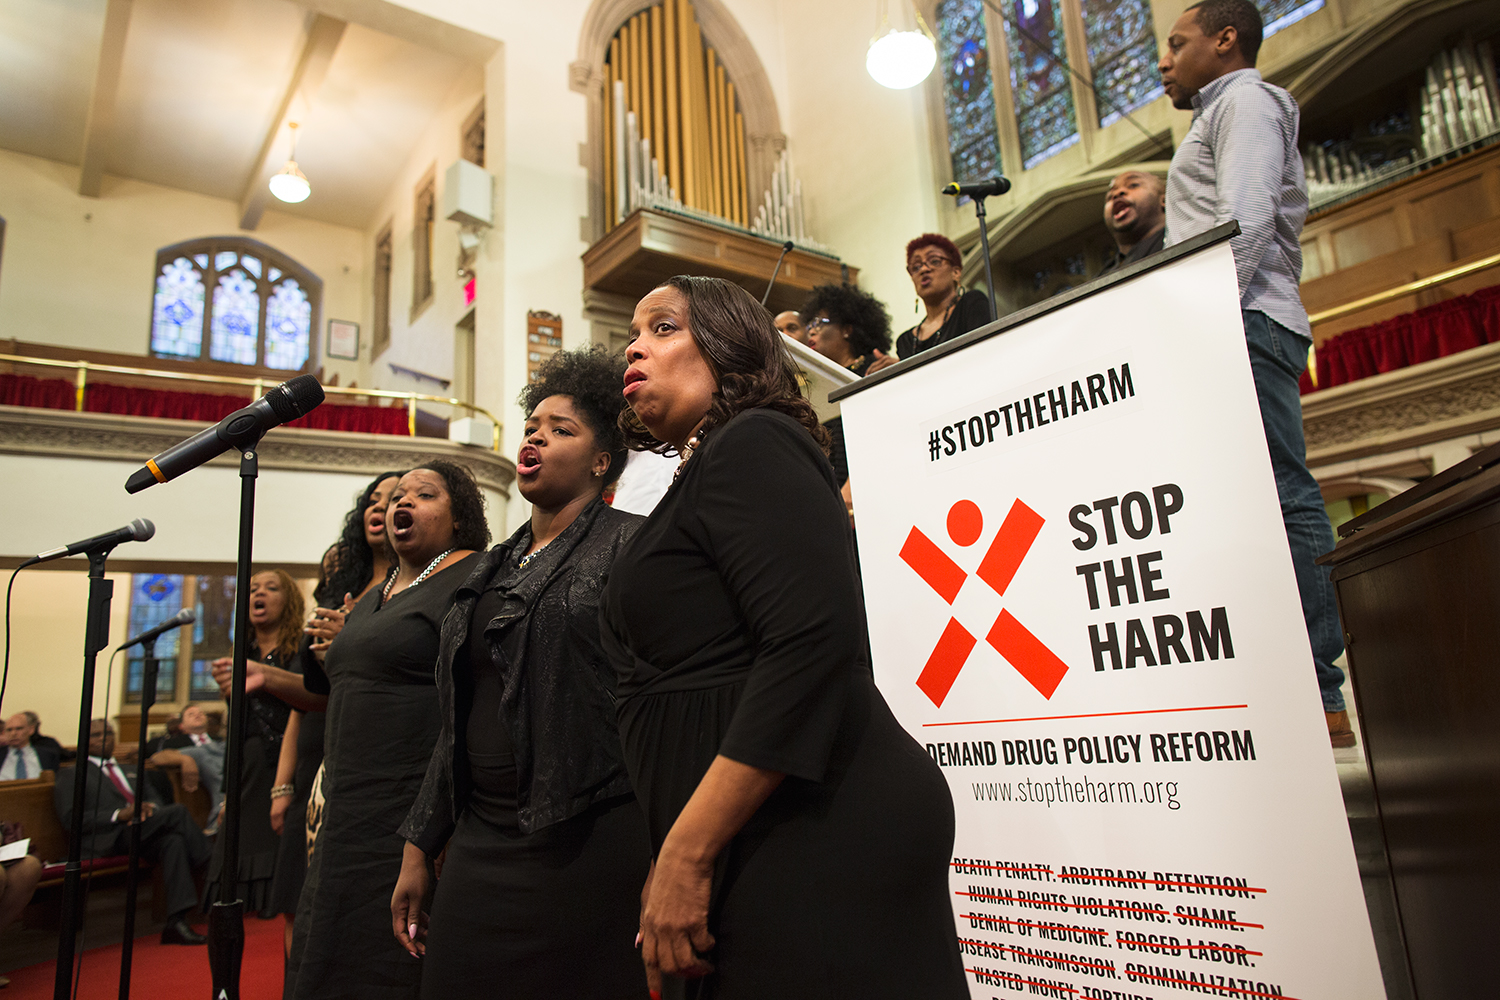  Choir sings during interfaith service at Harlem’s historic  Abyssinian Baptist Church  organized by advocacy group  VOCAL-NY  to call for end to the war on drugs on the eve of the United Nations General Assembly Special Session on the world drug pro